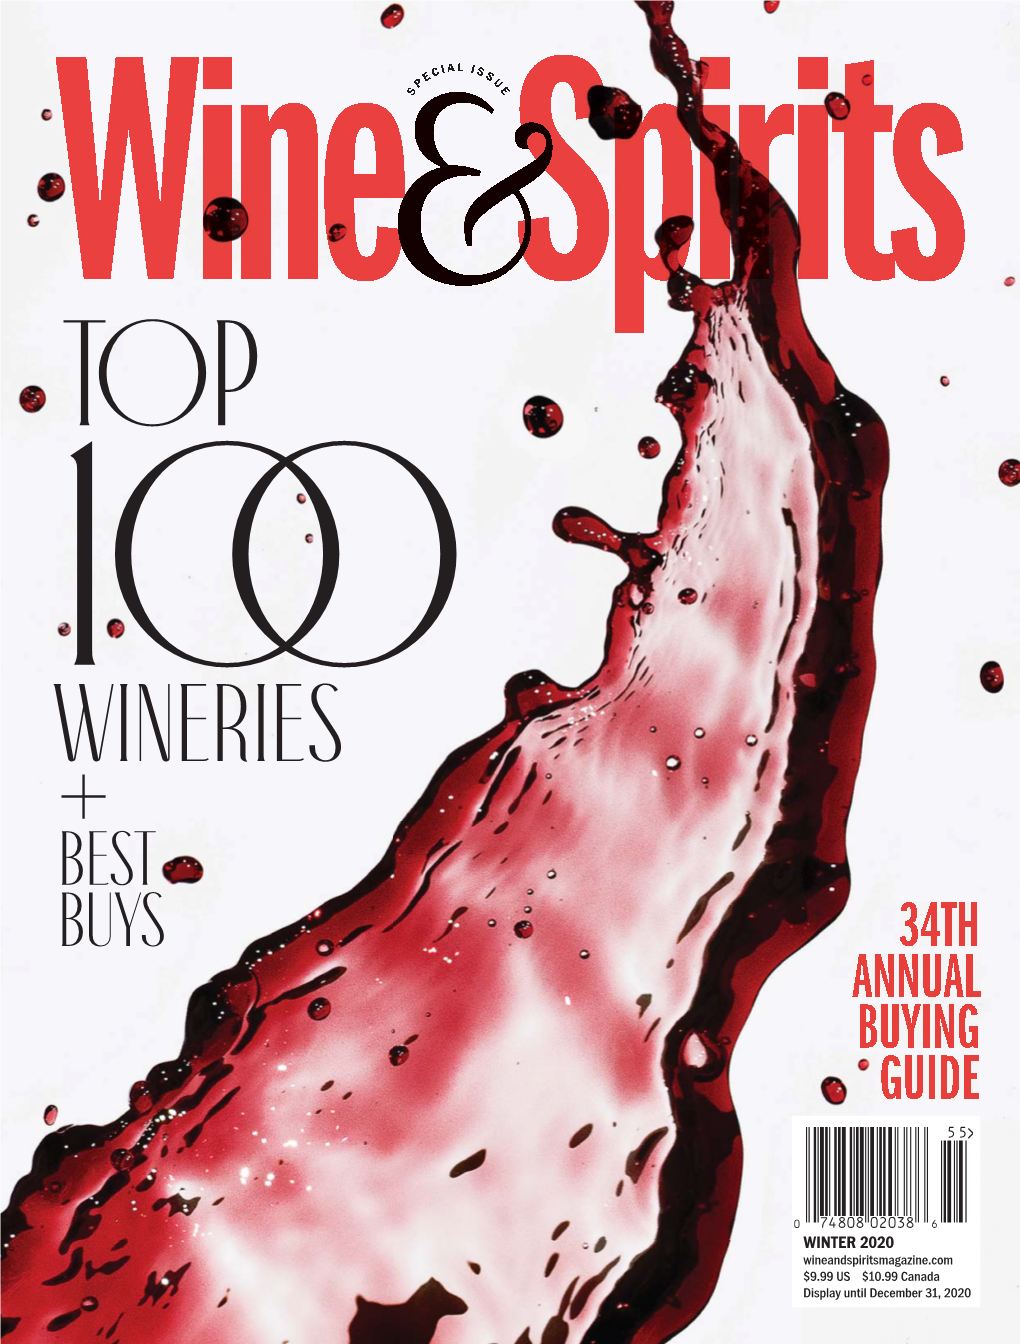 Wineries BEST+ BUYS 34TH ANNUAL BUYING GUIDE